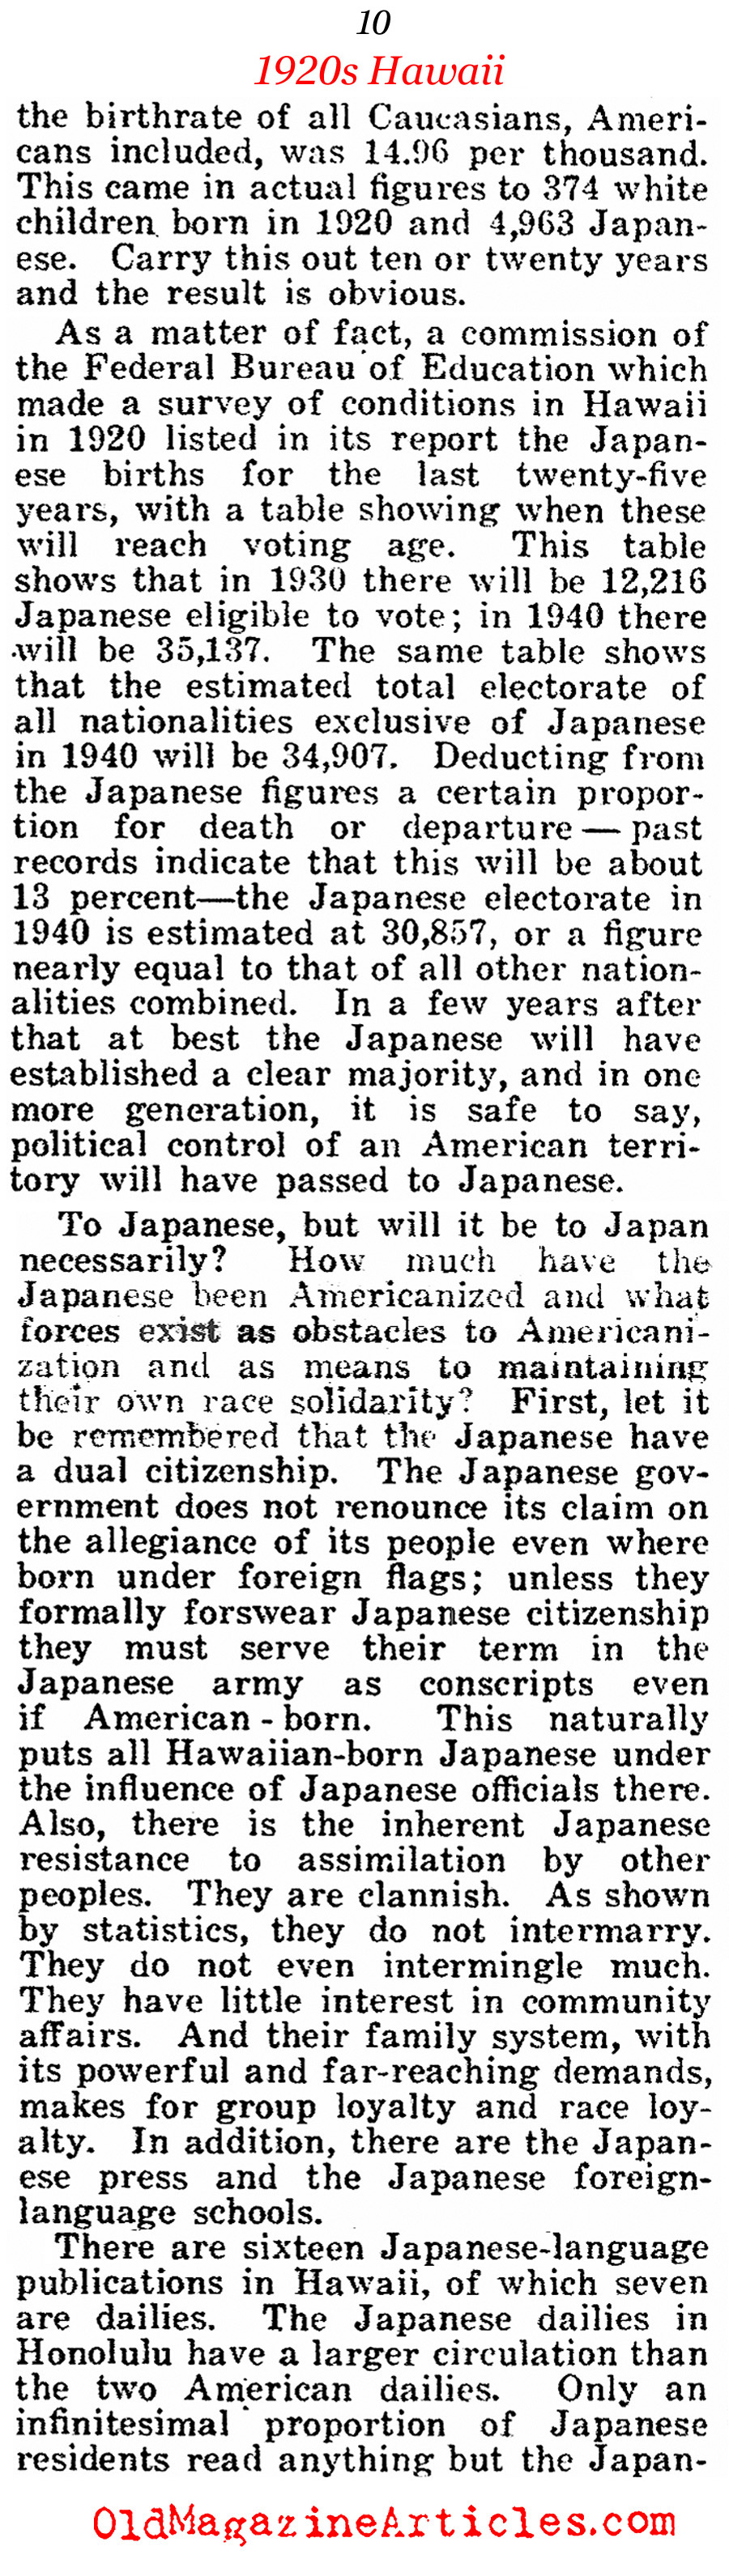 America's First Brush With Multiculturalism<BR> (American Legion Weekly, 1922)